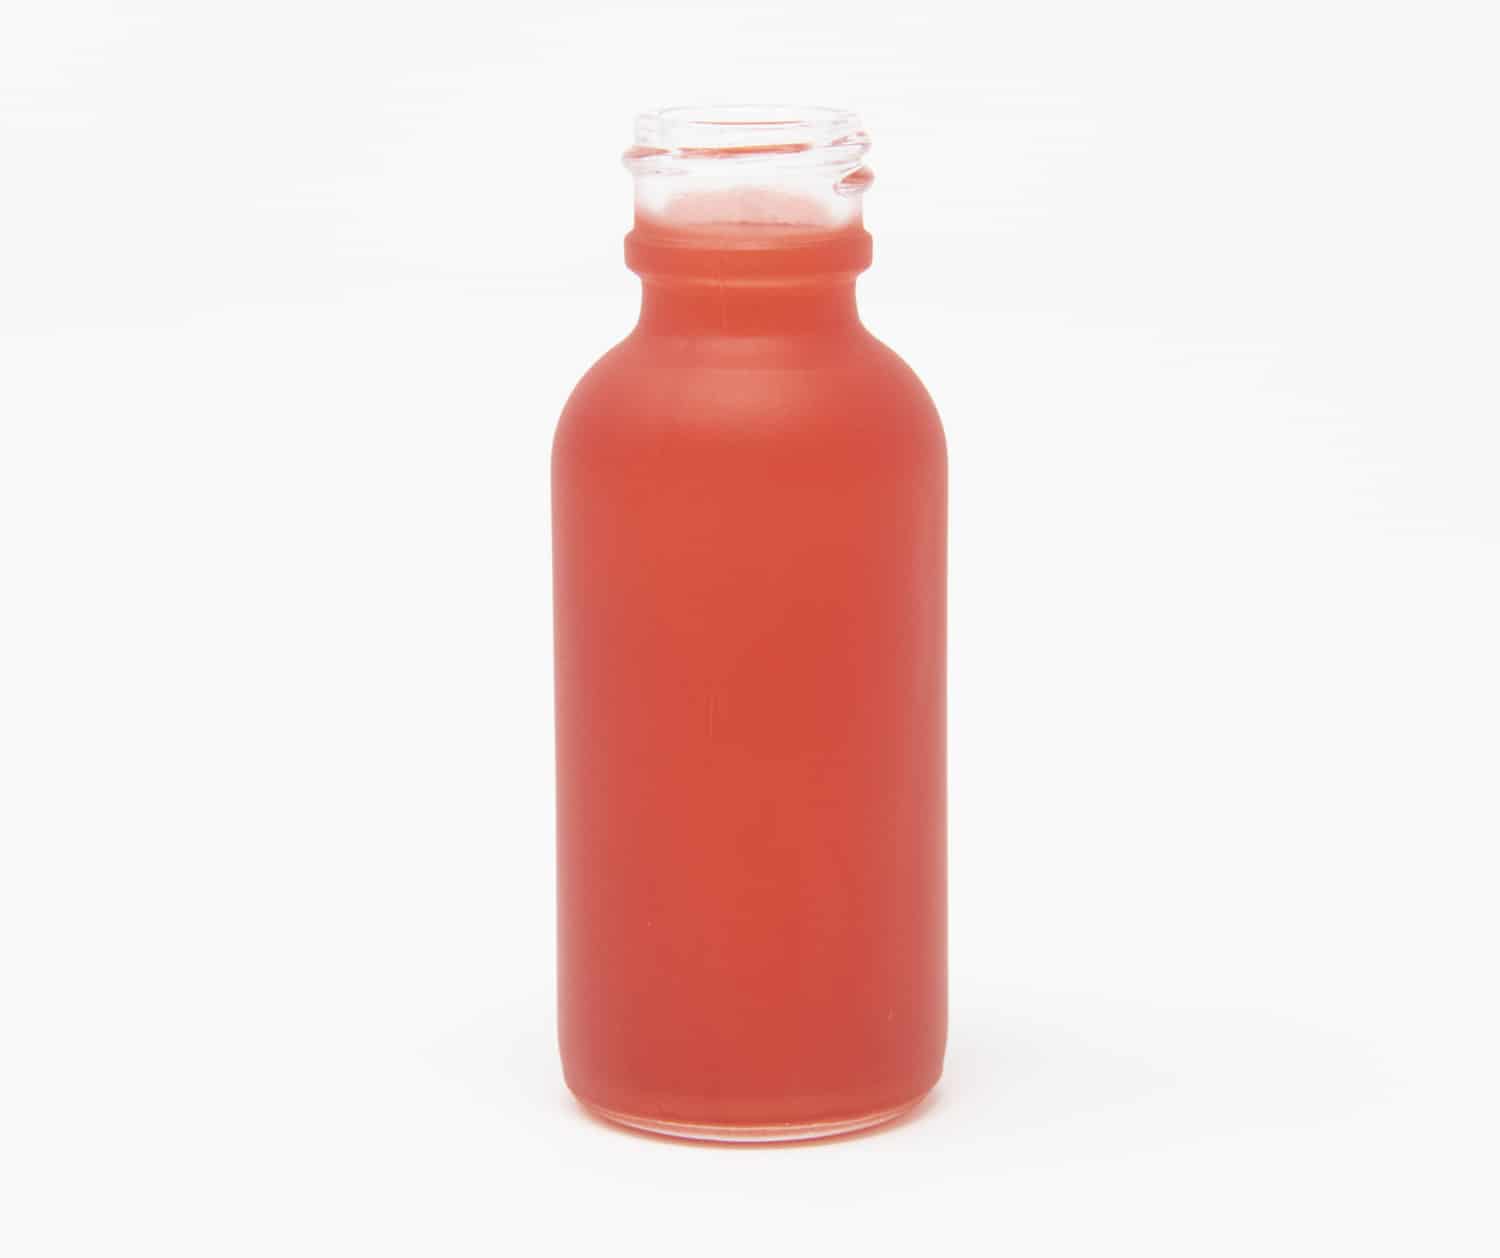 Popular Packaging for Juices - CupBarn